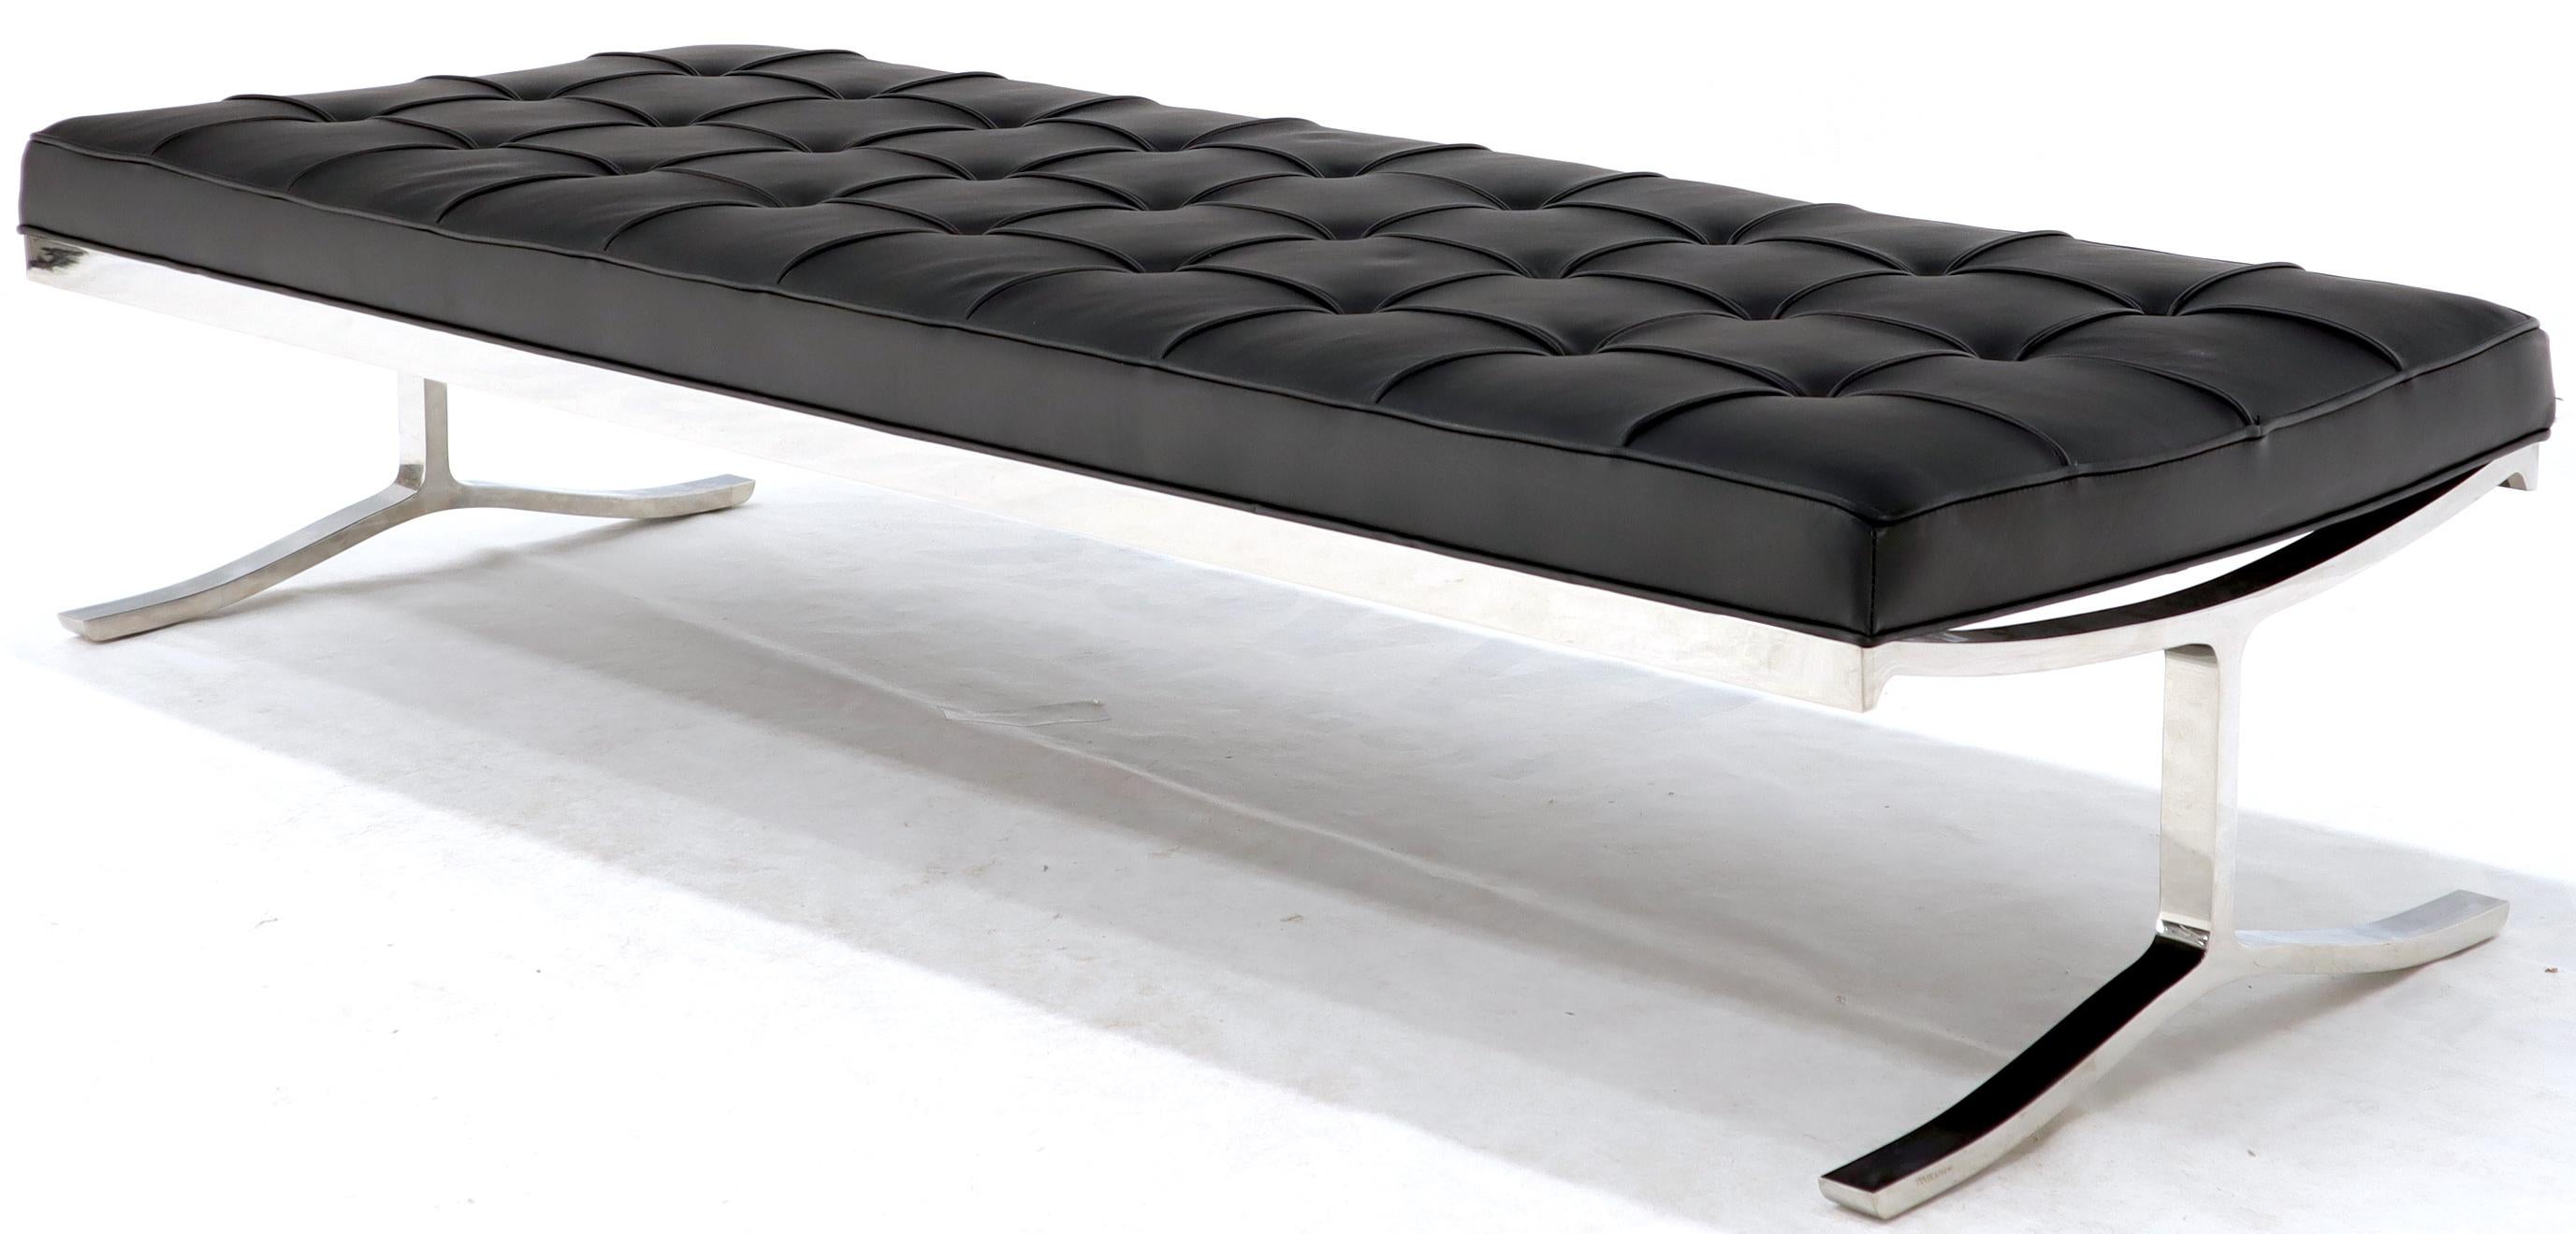 Mid-Century Modern Nico Zographos heavy stainless steel tufted leather upholstery bench almost daybed size. NYC area delivery starts from $150.